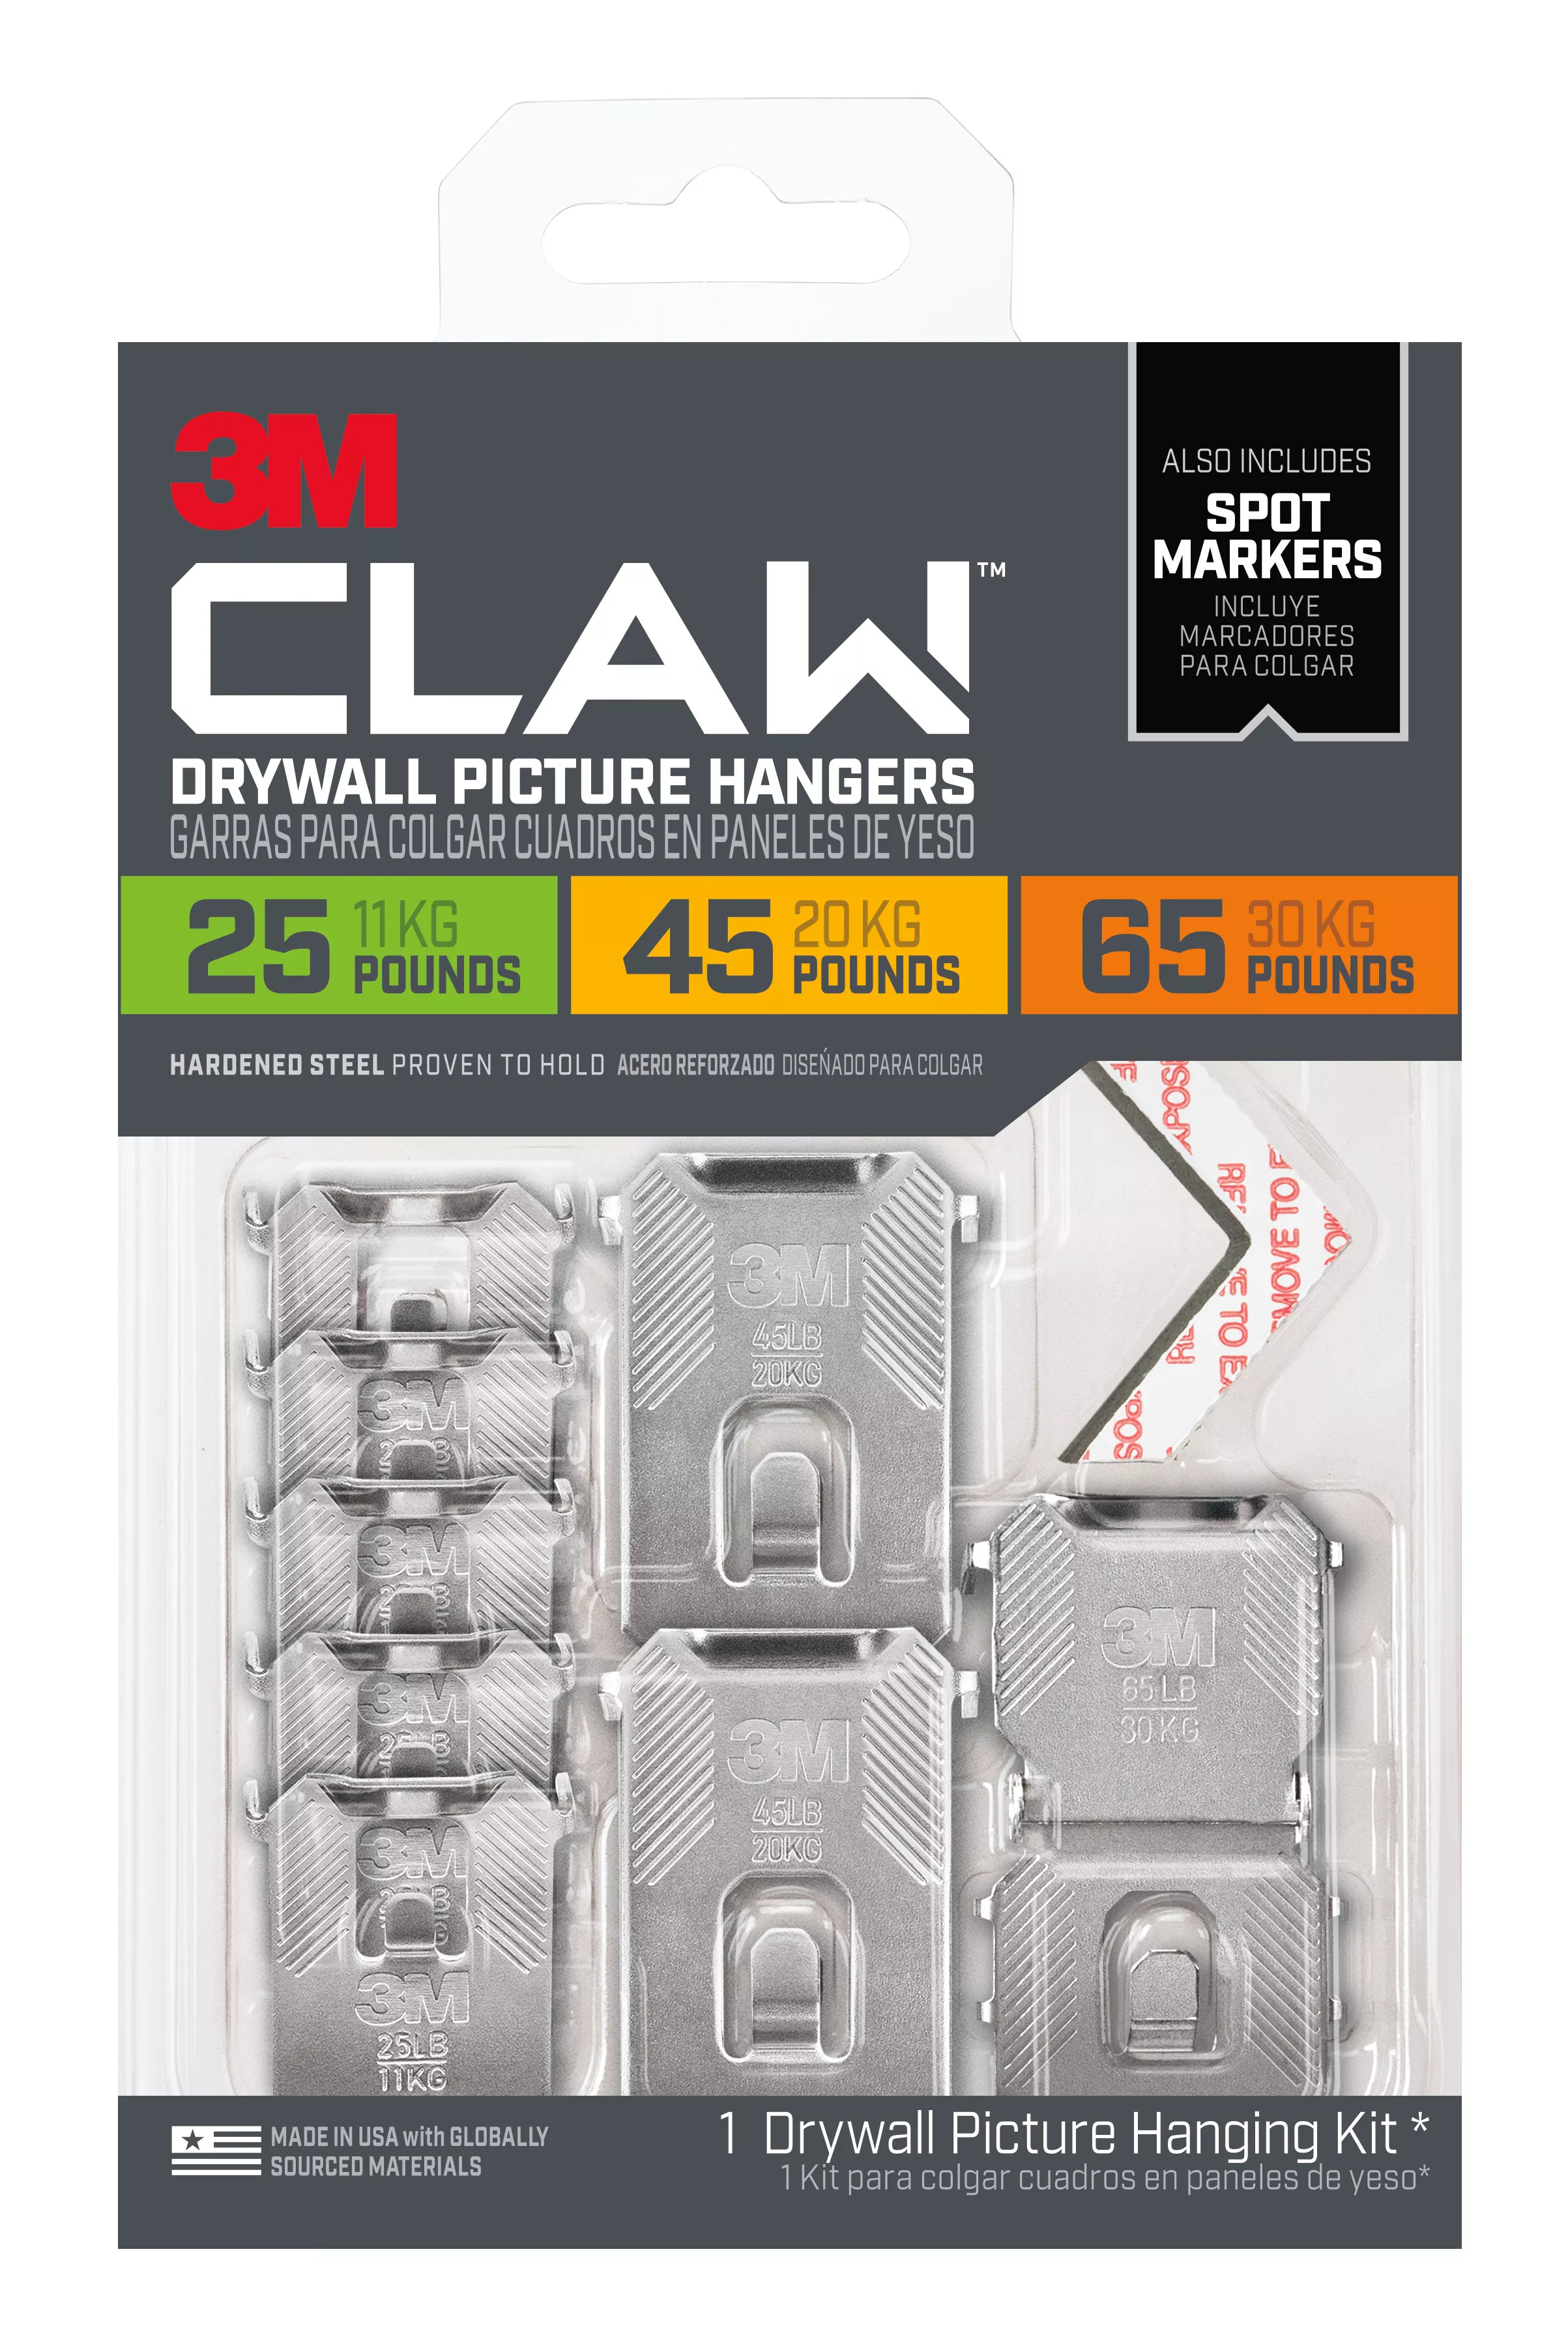 3M CLAW™ Drywall Picture Hangers with Temporary Spot Markers 3PHKITM-8ES, Assorted